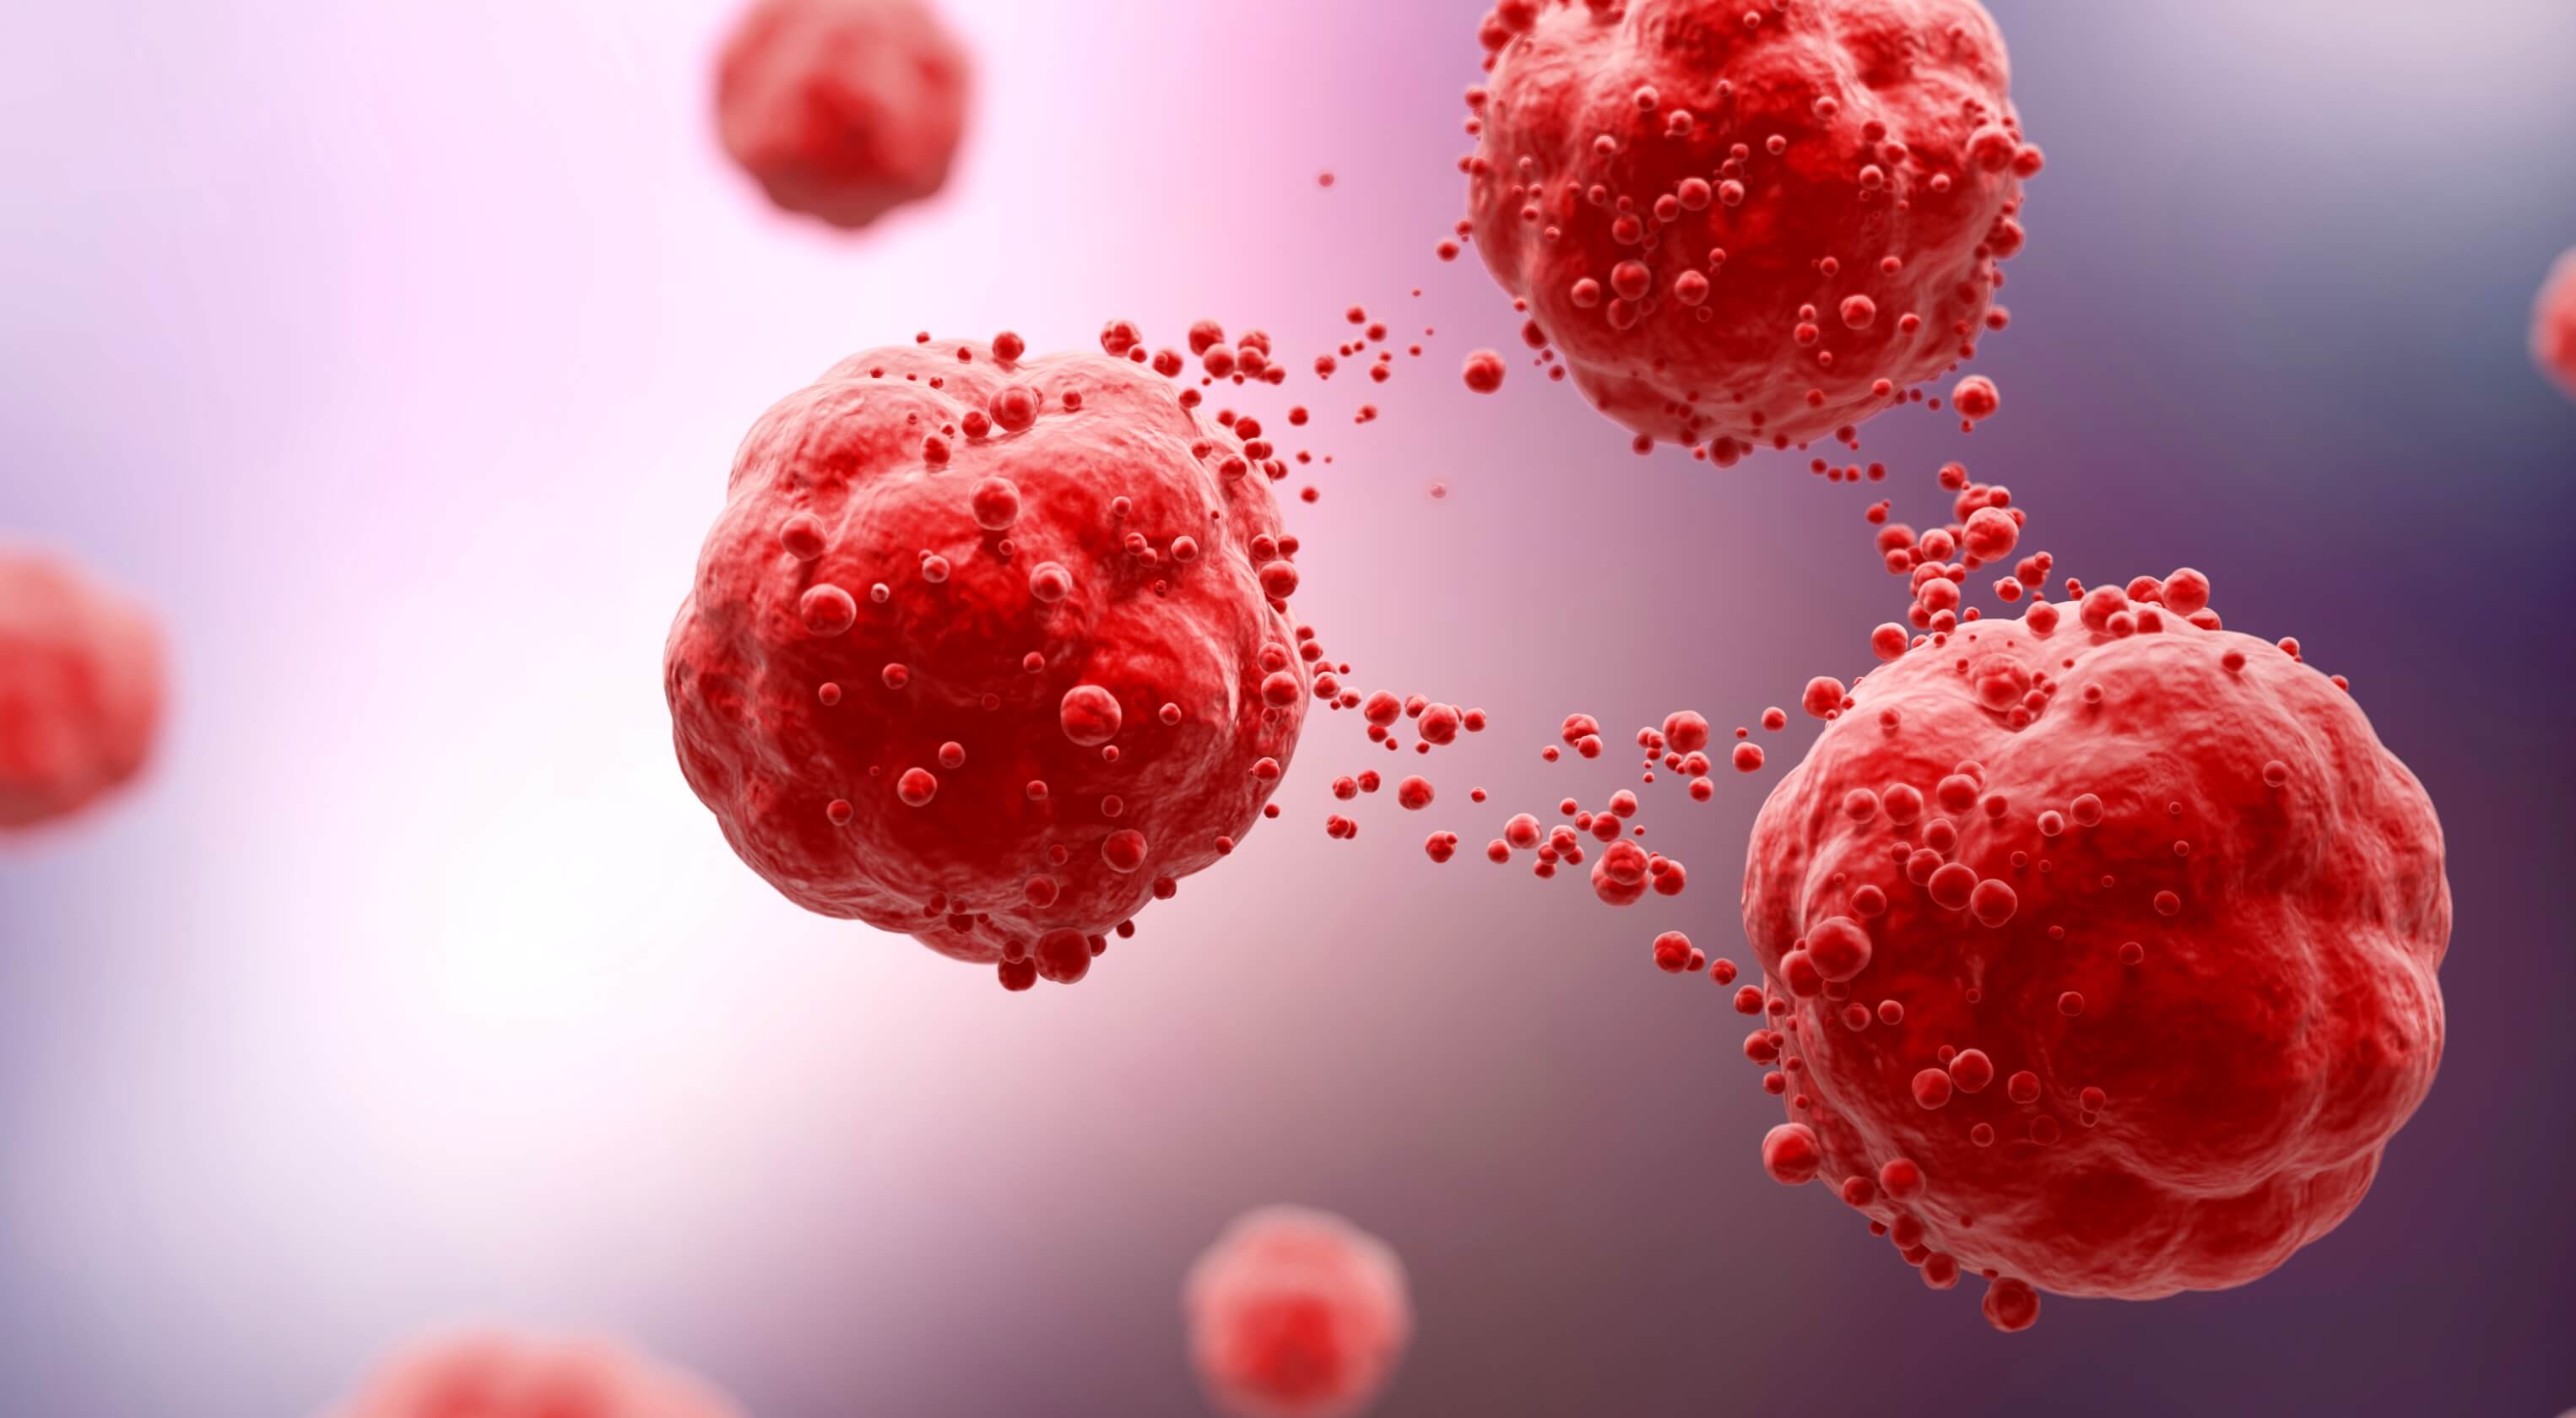 A close-up visualization of red blood cells seperating